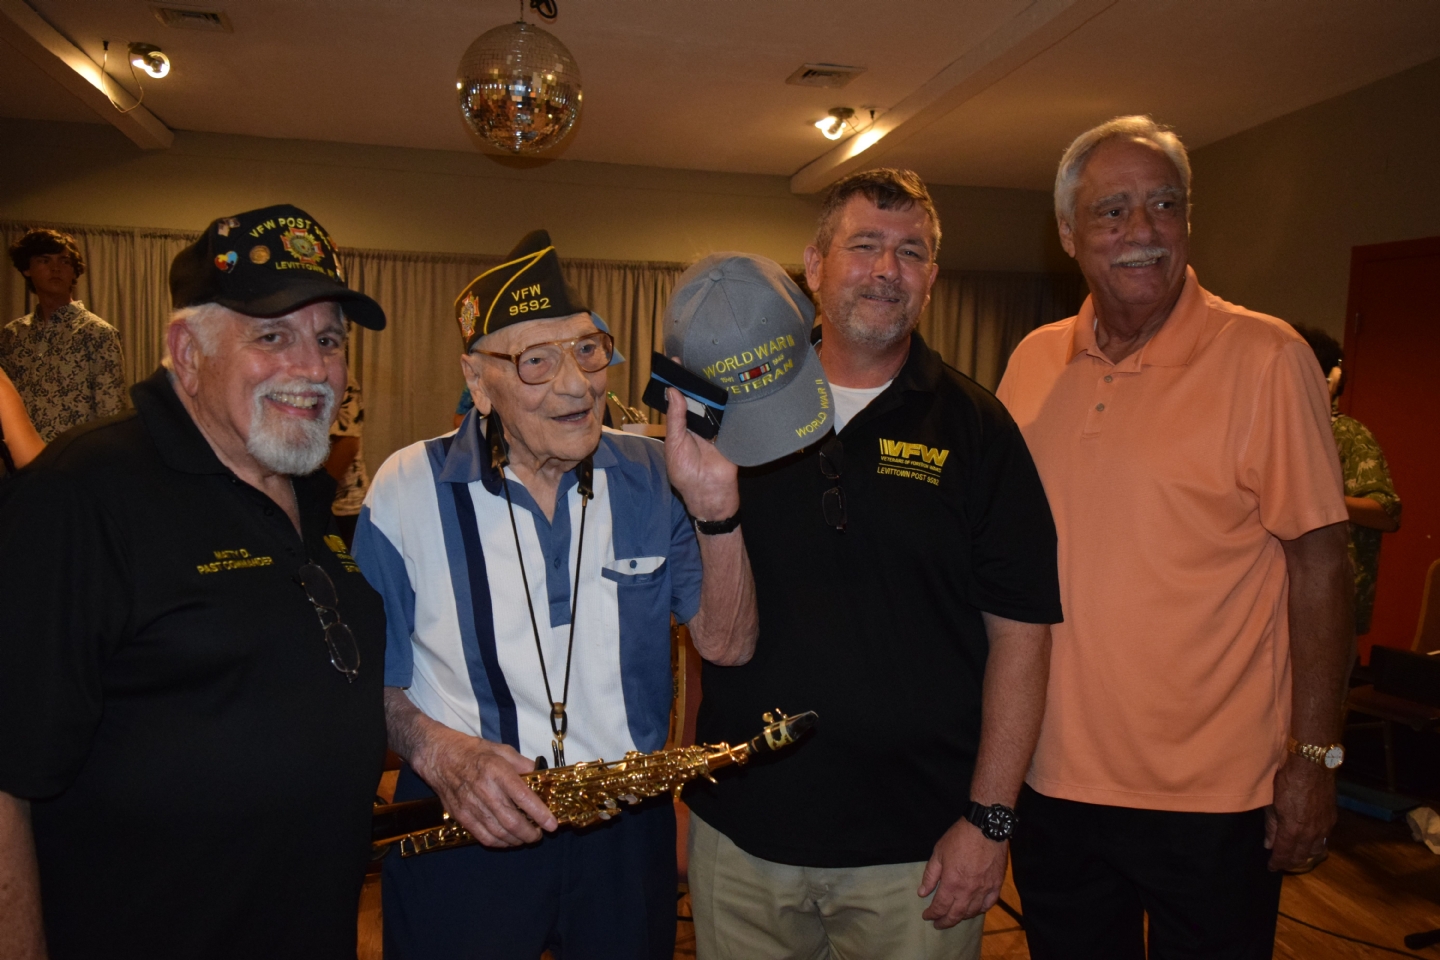 On August 2, 2022 local area high school and college musicians performed a concert for VFW Post Member and World War II Veteran Dominic Critelli. Dominic, who is 102 years of age, joined the students at the end of the concert for an impromptu 30-minute jazz jam session.